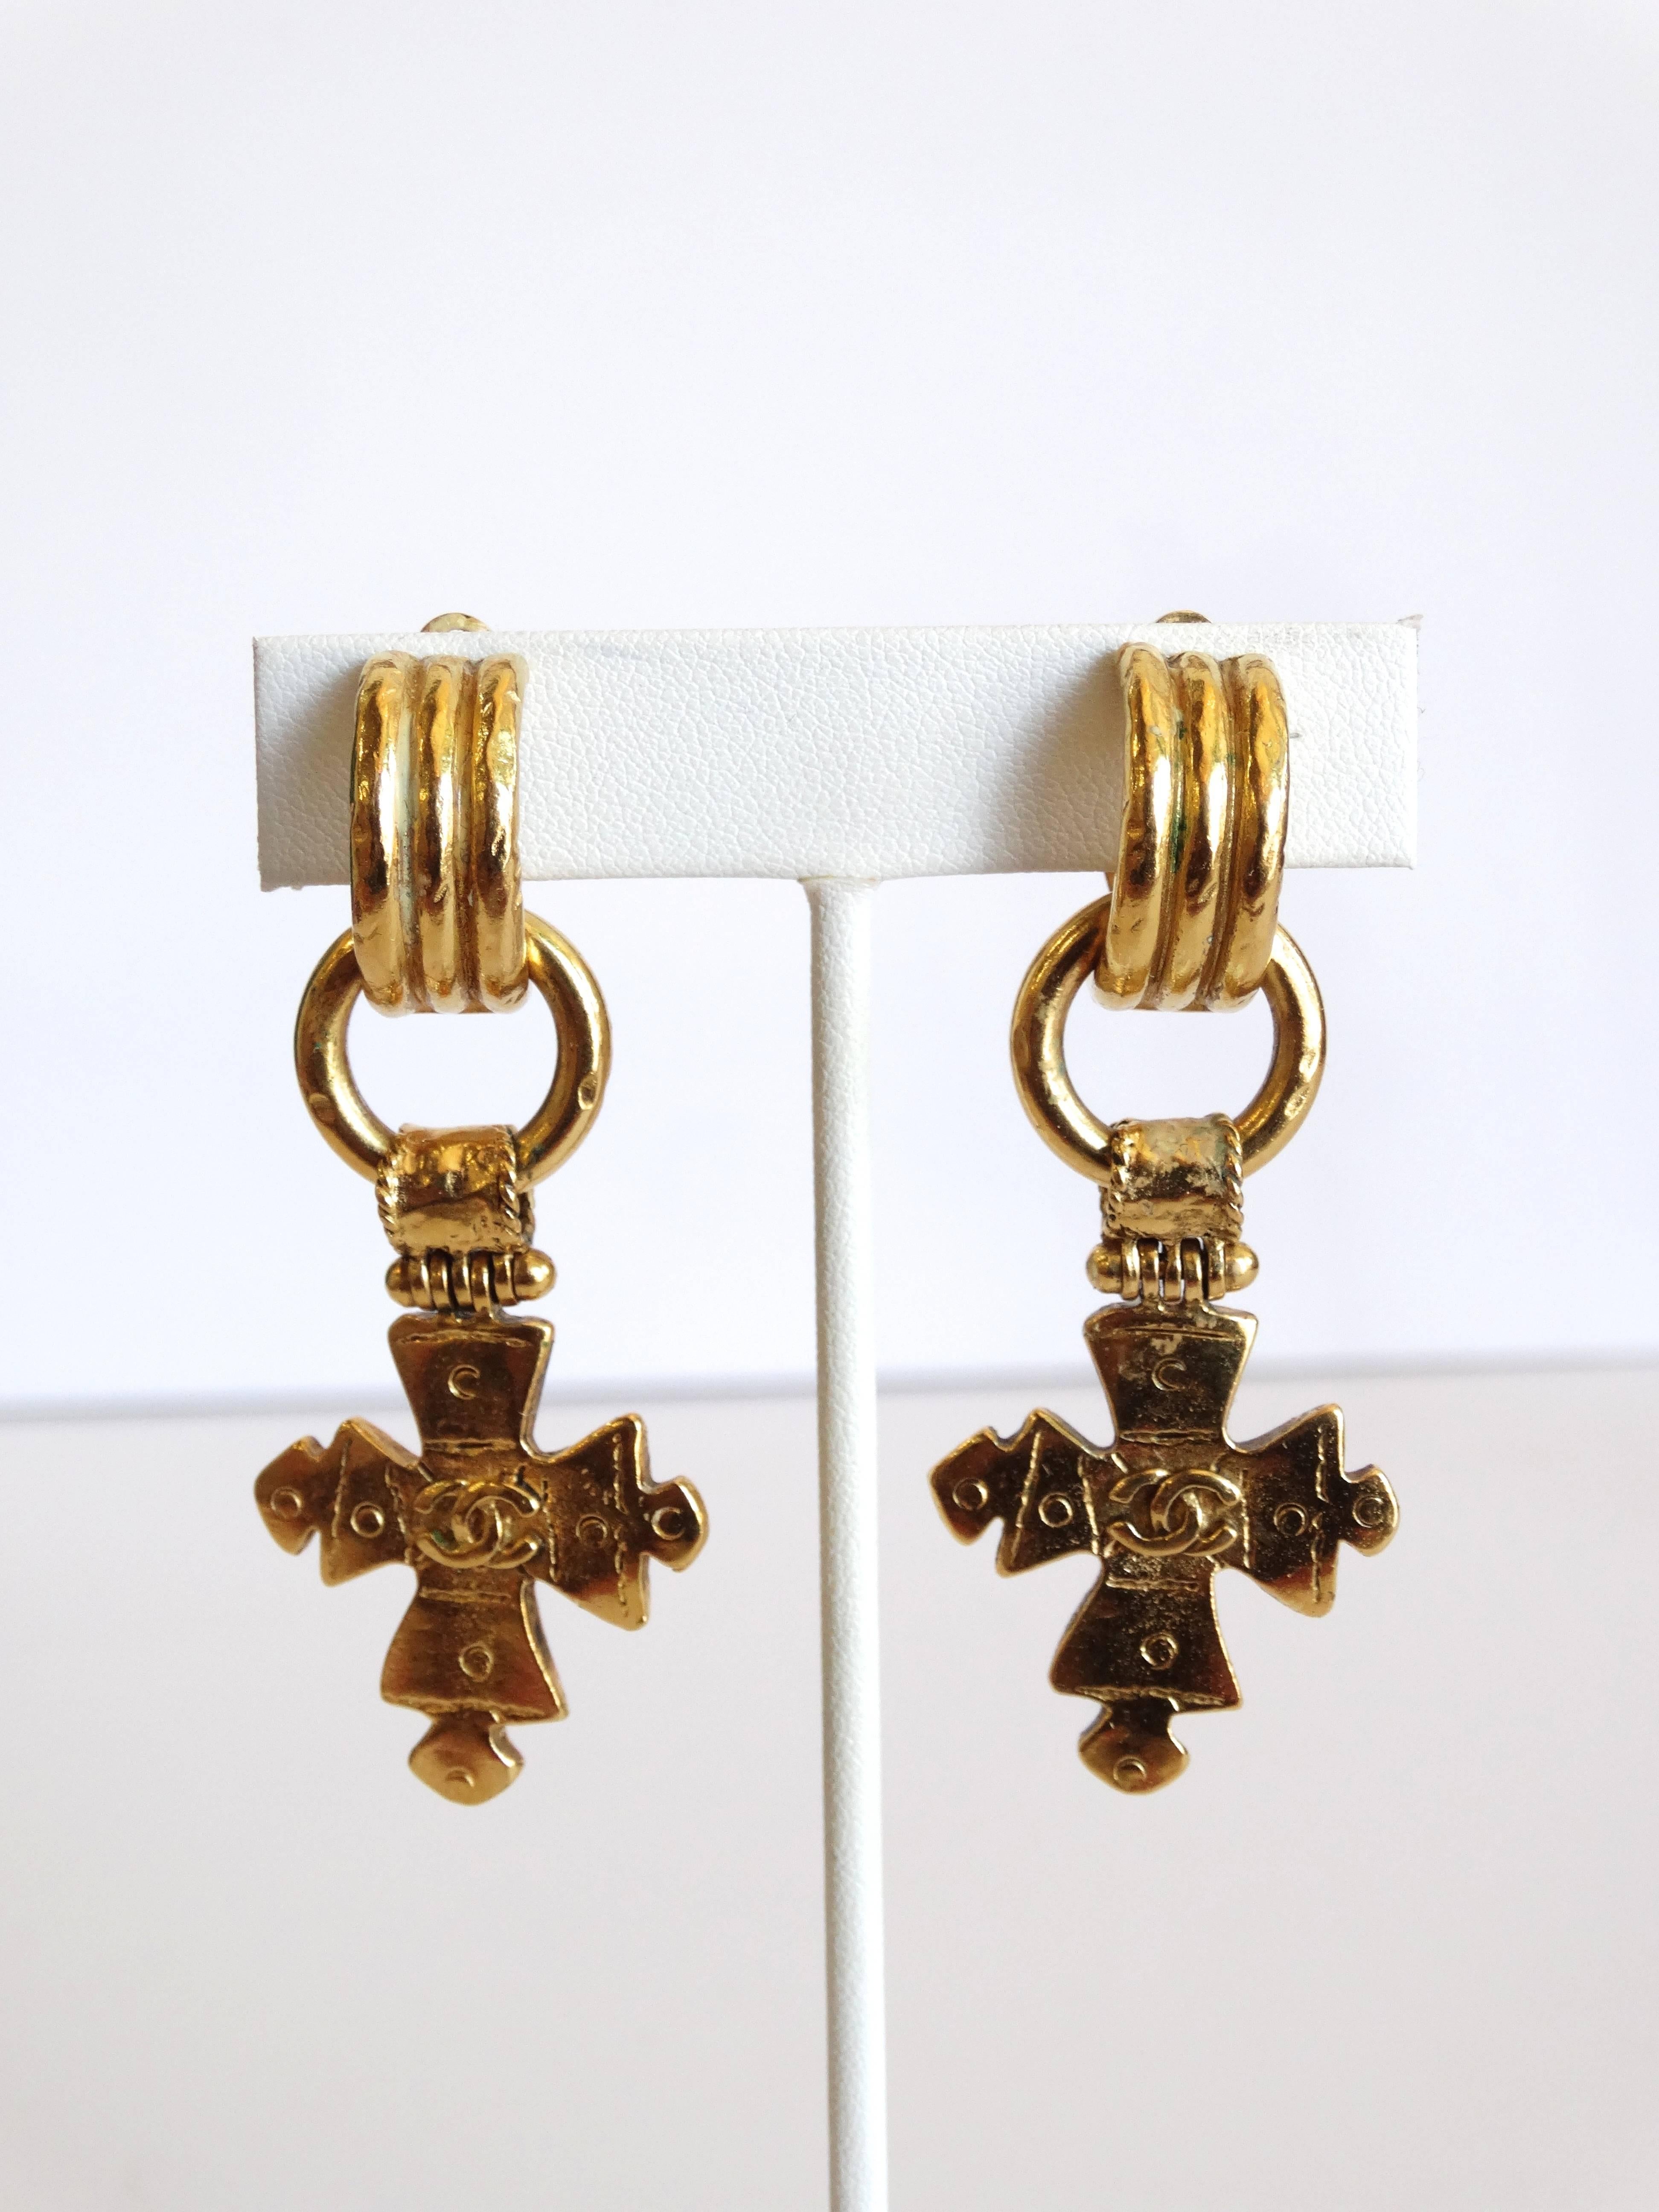 Incredible pair of Chanel cross earrings! From Spring 1994- these earrings come to you in a brilliant gold metal with double cc cross charms that are detachable- can be worn with or without. Made in France engraved on the back. They look truly